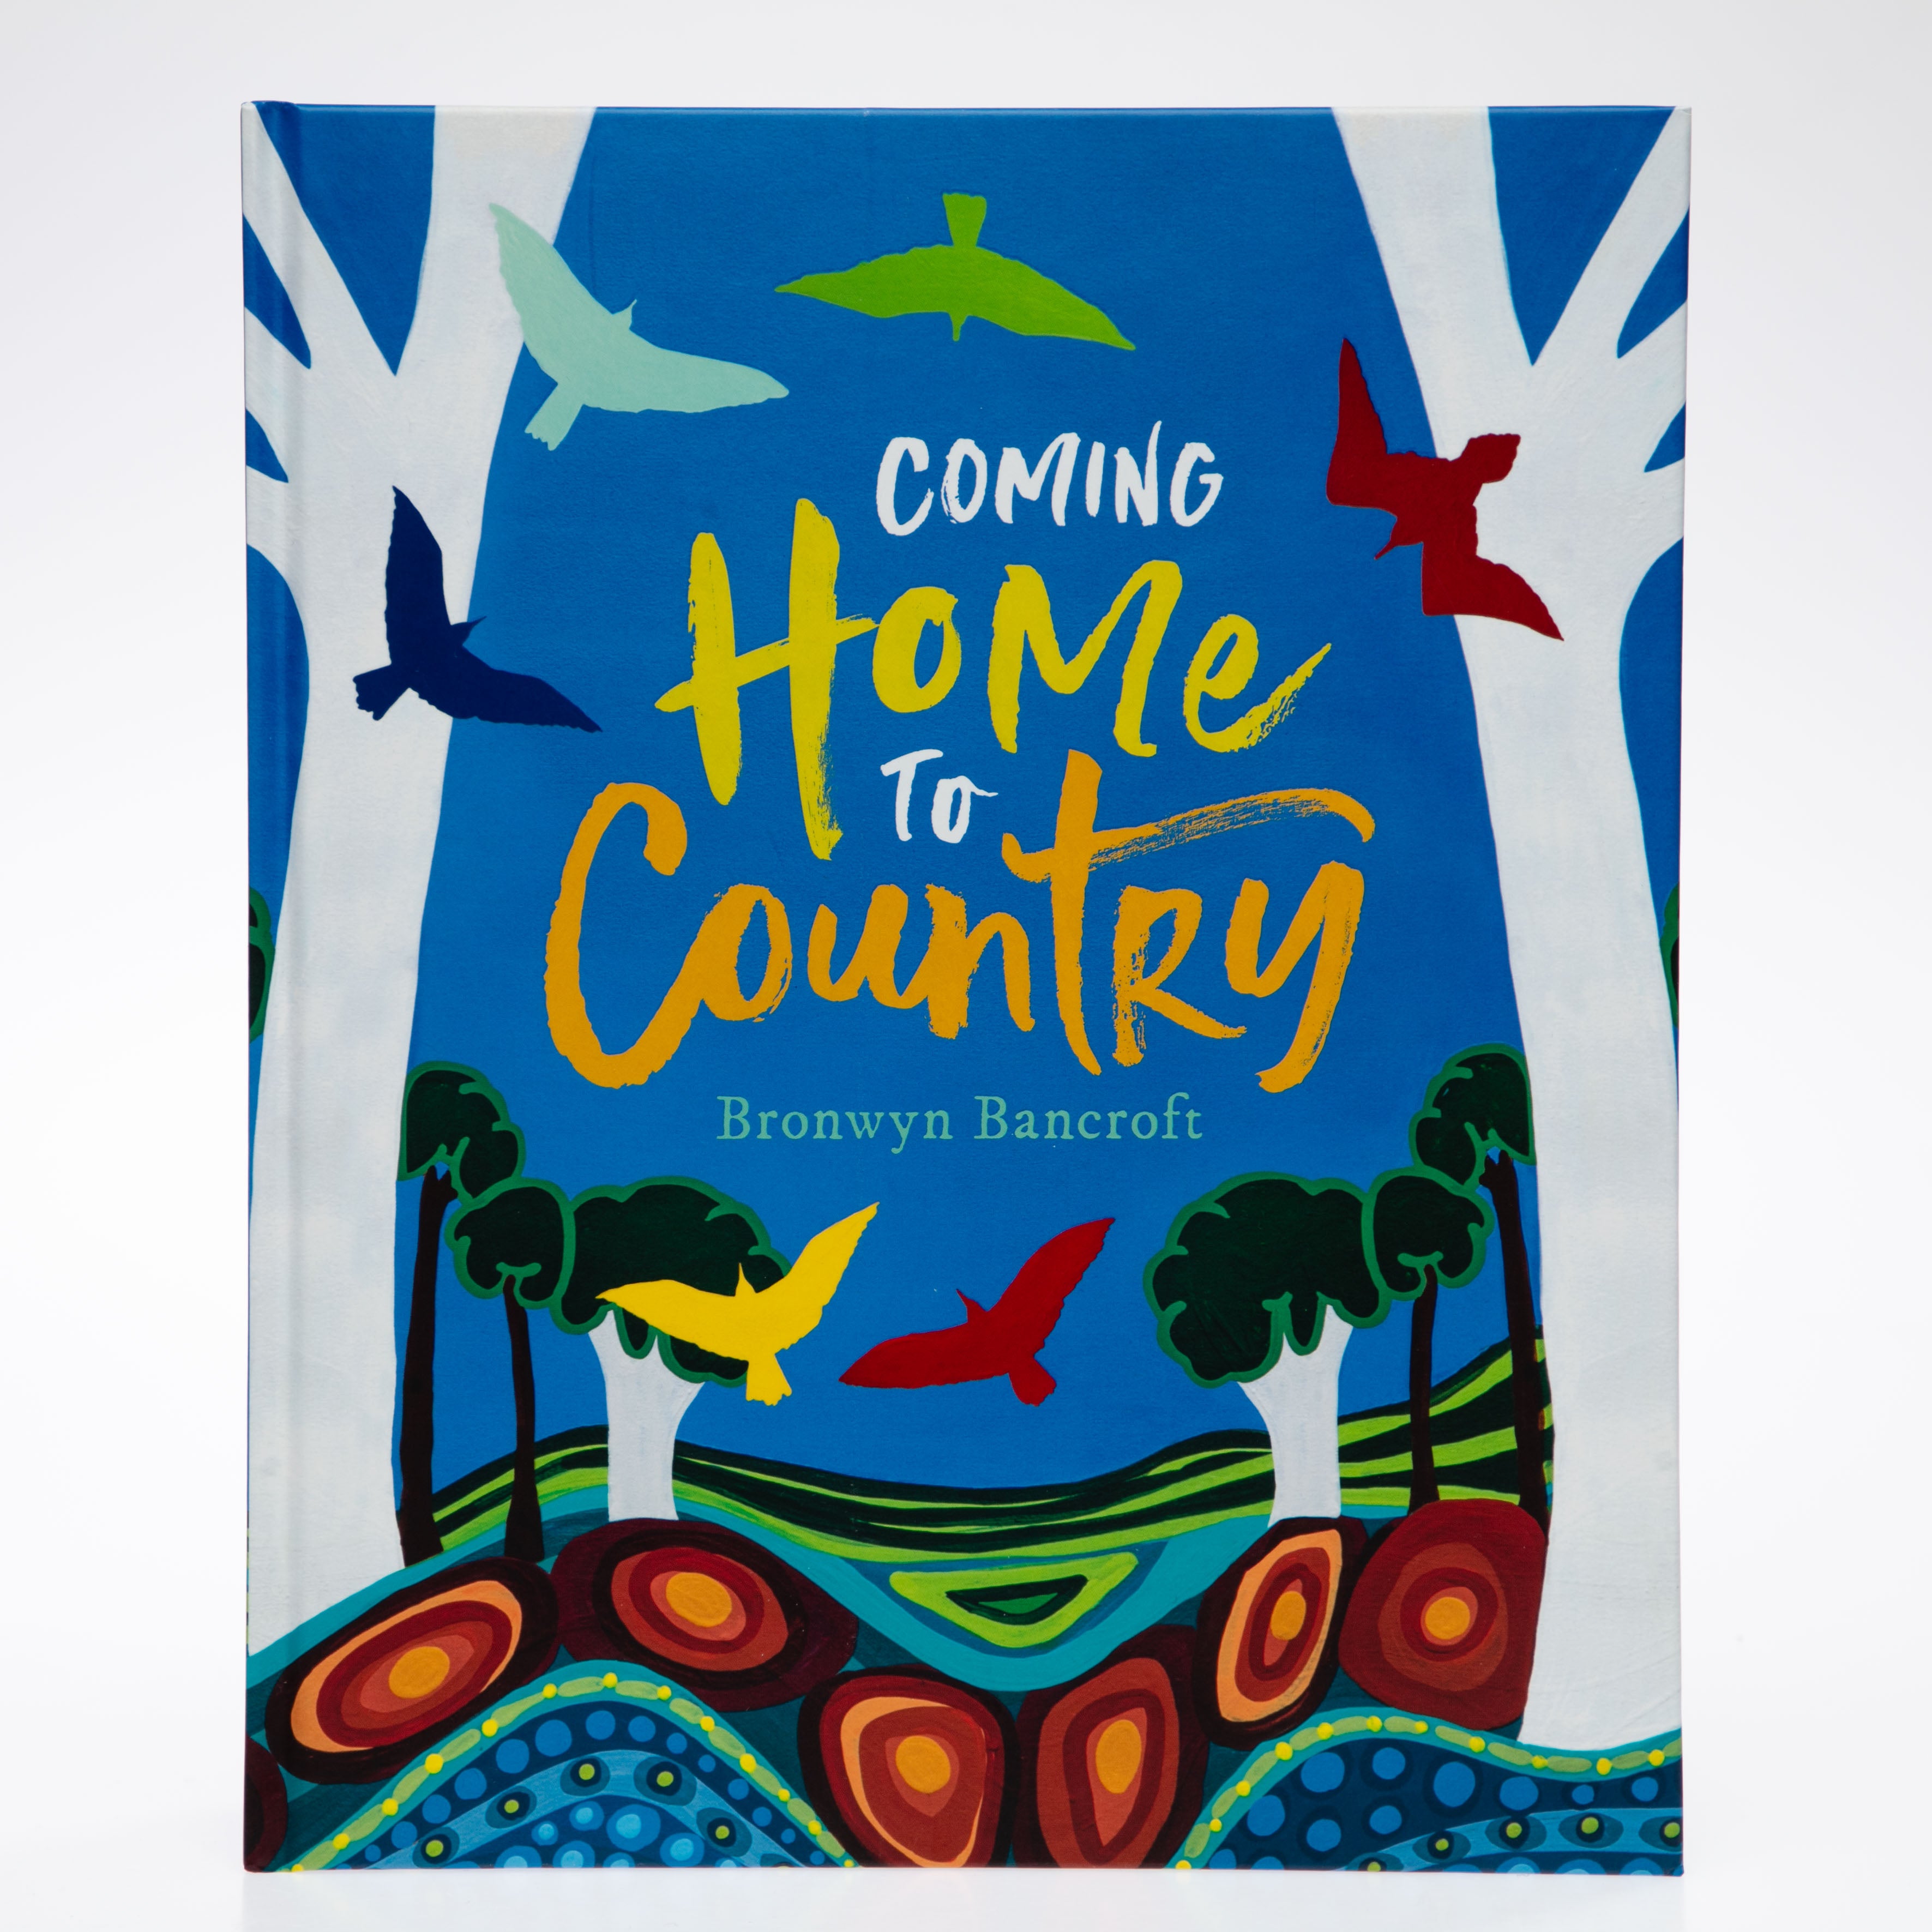 Coming Home to Country